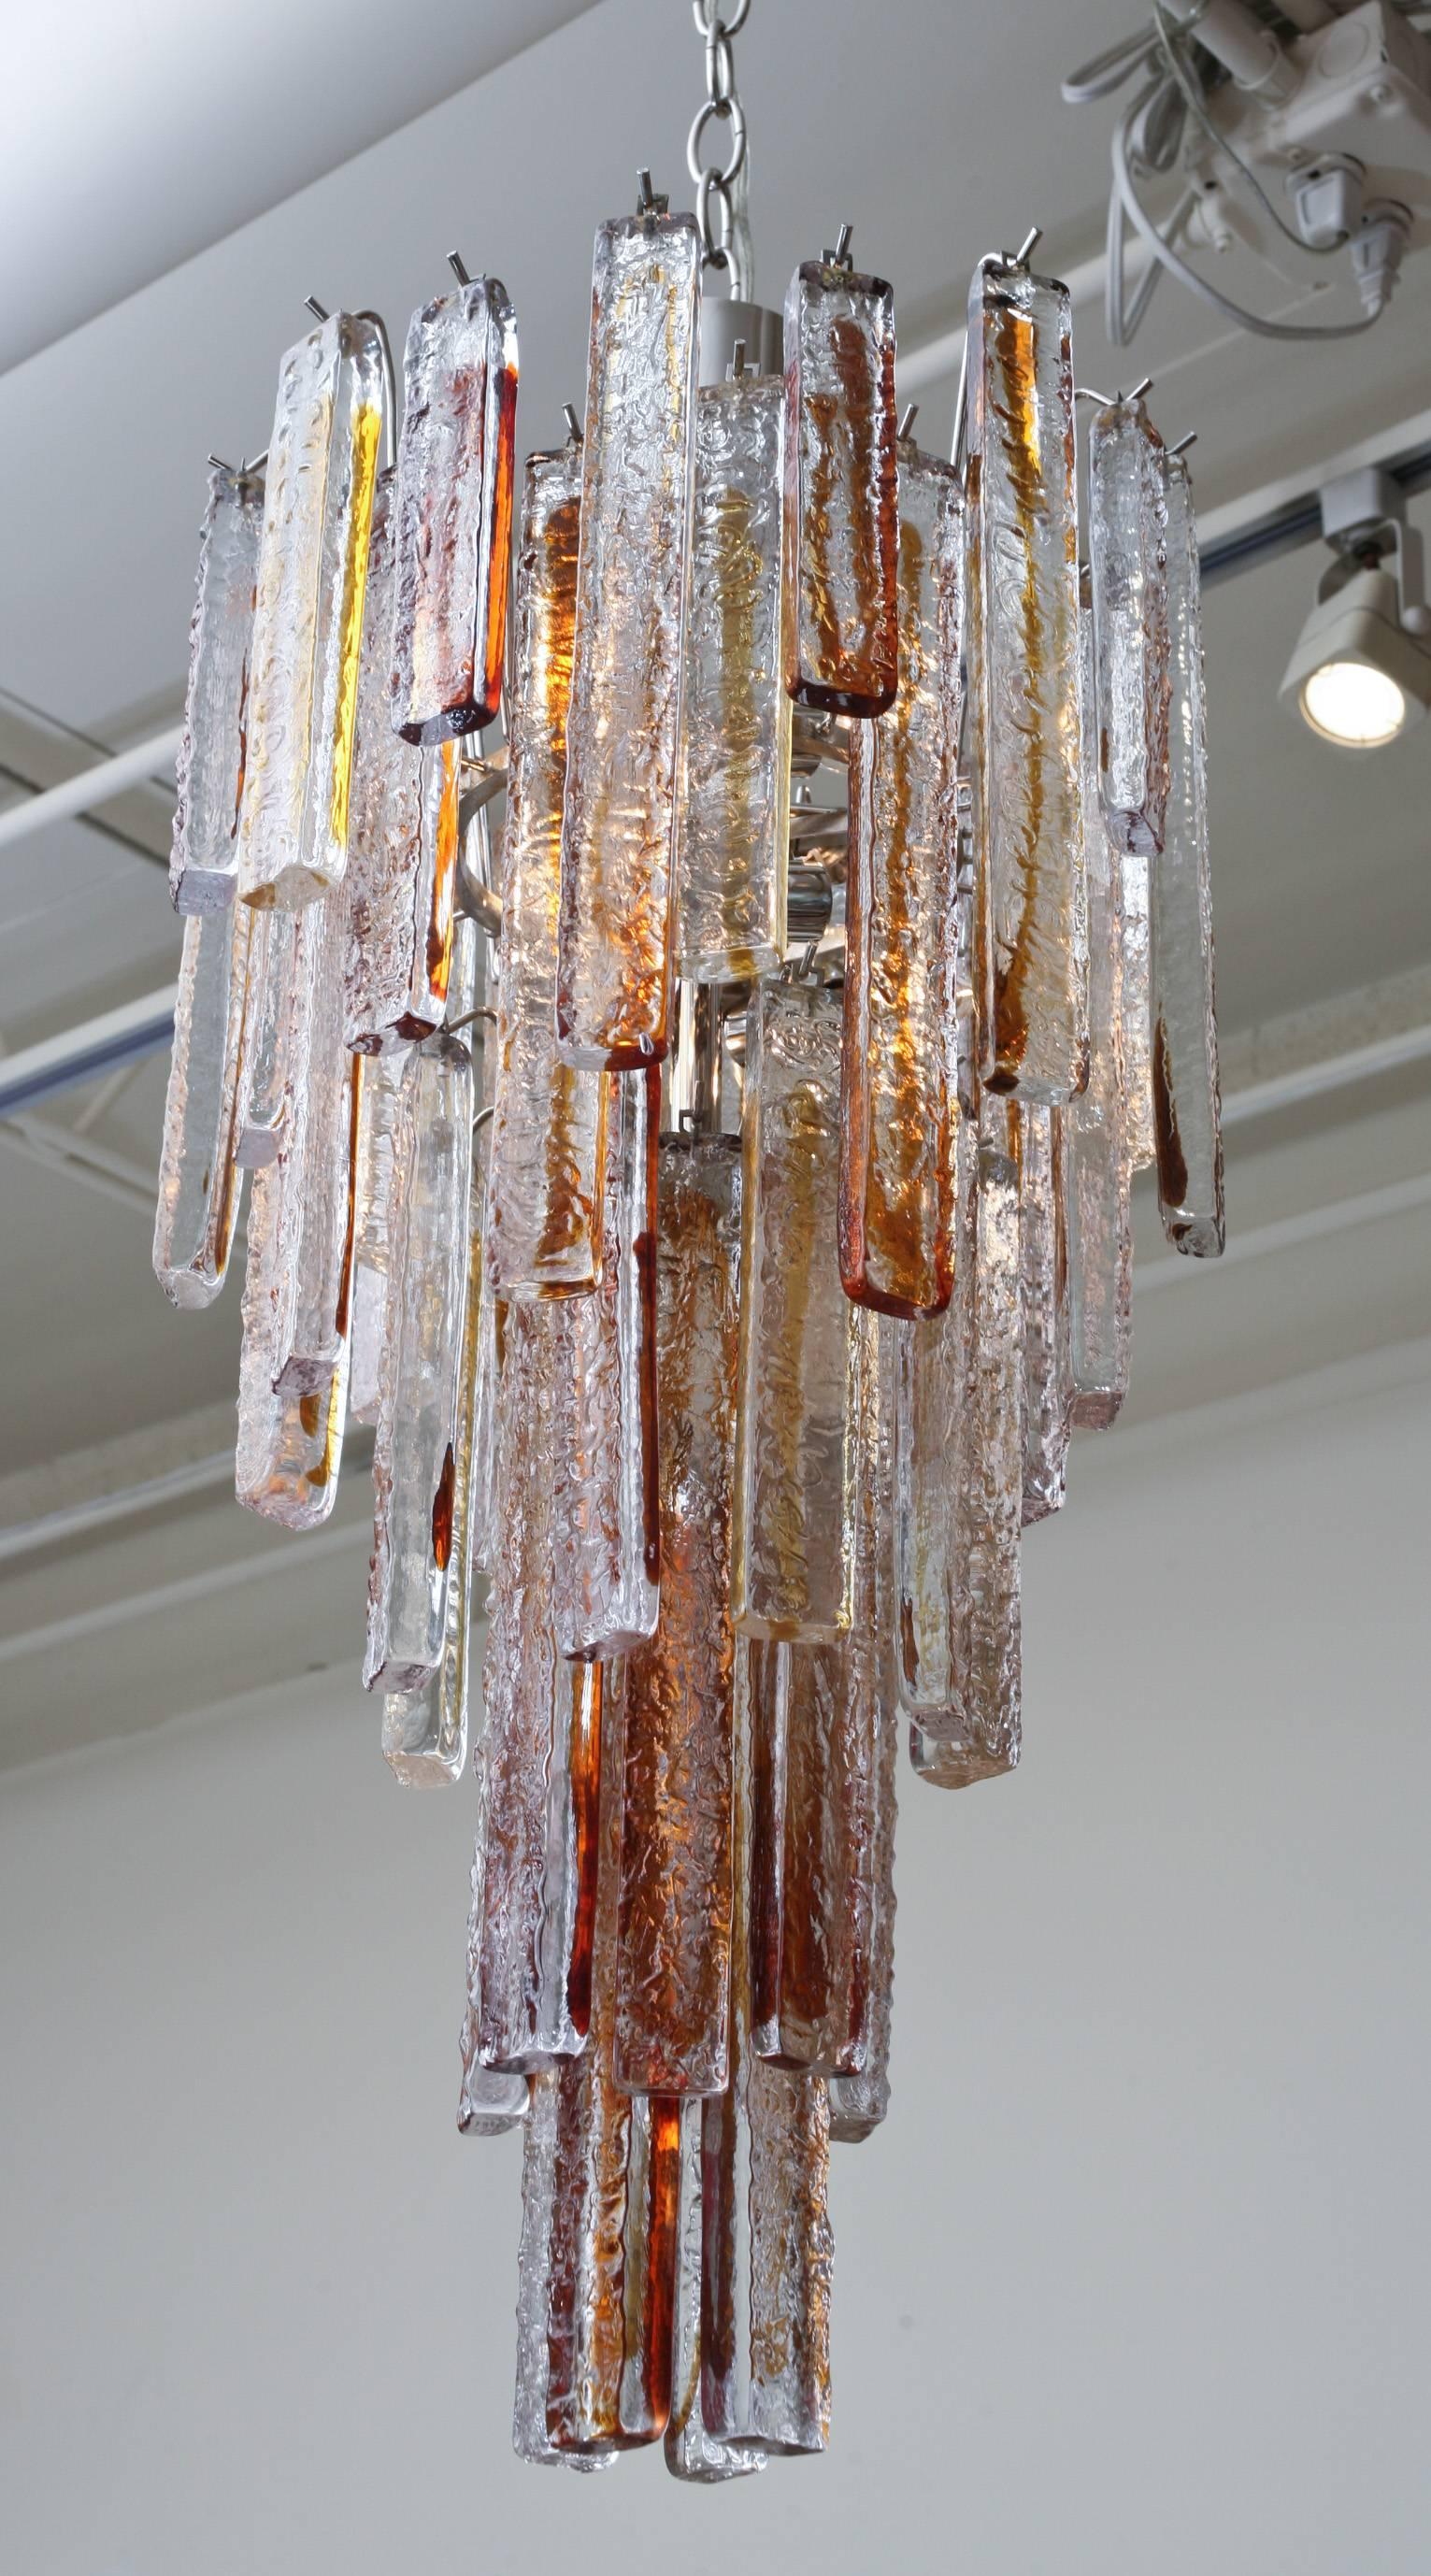 This stunning Italian Murano vintage Mazzega glass chandelier has 53 staggered textural glass pendants hanging. It is amber and clear glass fused and is very sculptural. It has all been rewired for American lighting. The cage was redone in nickel